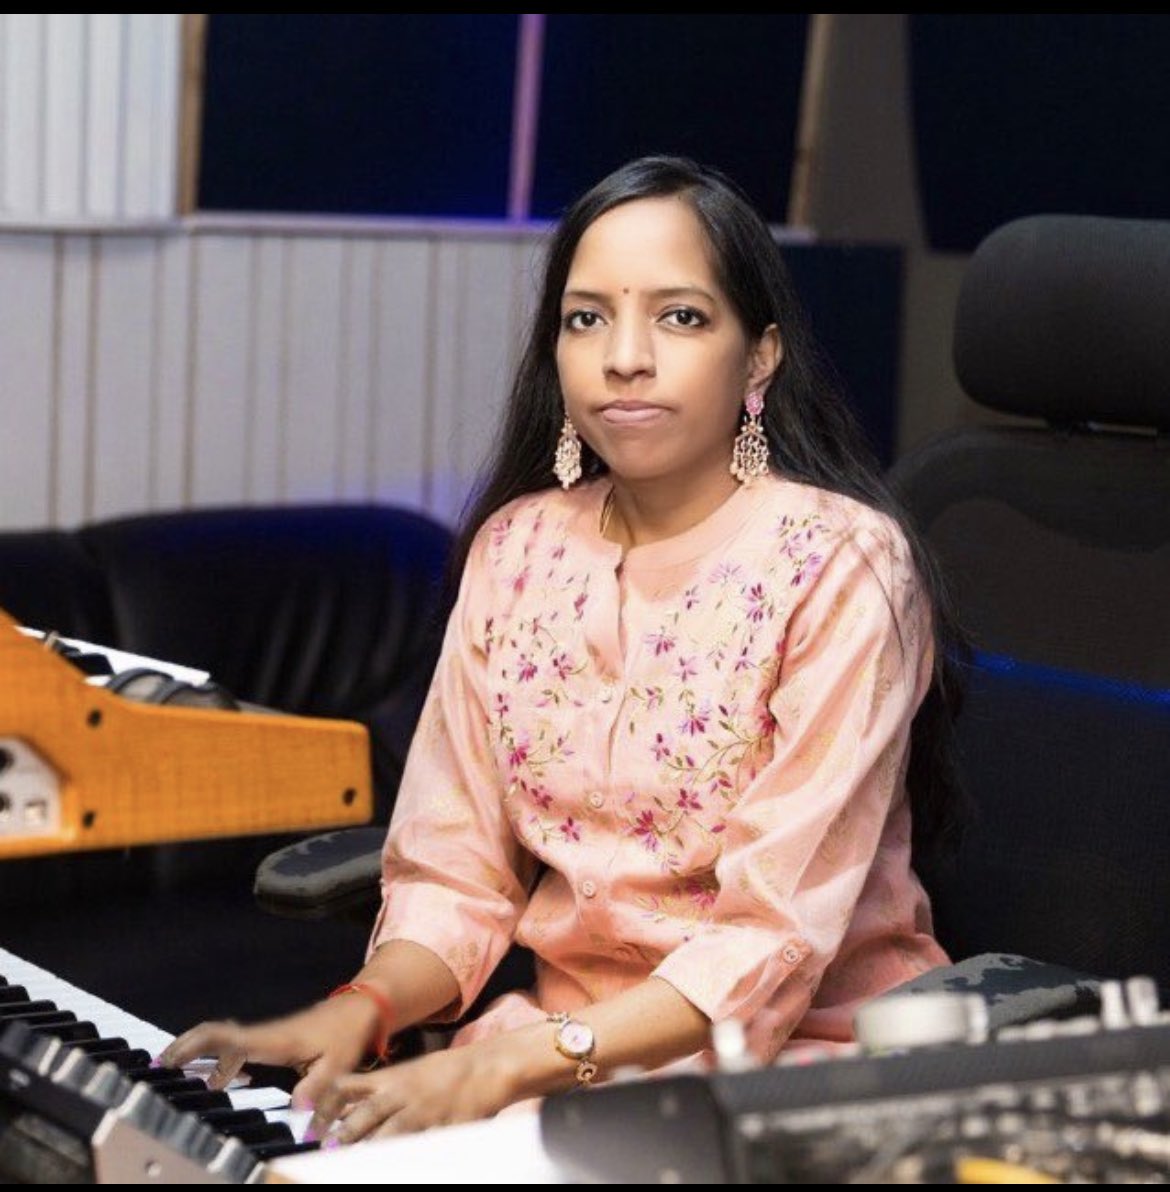 Extremely sad and shocked to hear about the sudden demise of #bhavatharini thanks for singing one of my favourite and important songs in my career #kaatrilvarumgeethame,My heartfelt condolences to the family @thisisysr, may her soul rest in peace 🙏 #bhavatharini #ripbhavatharini